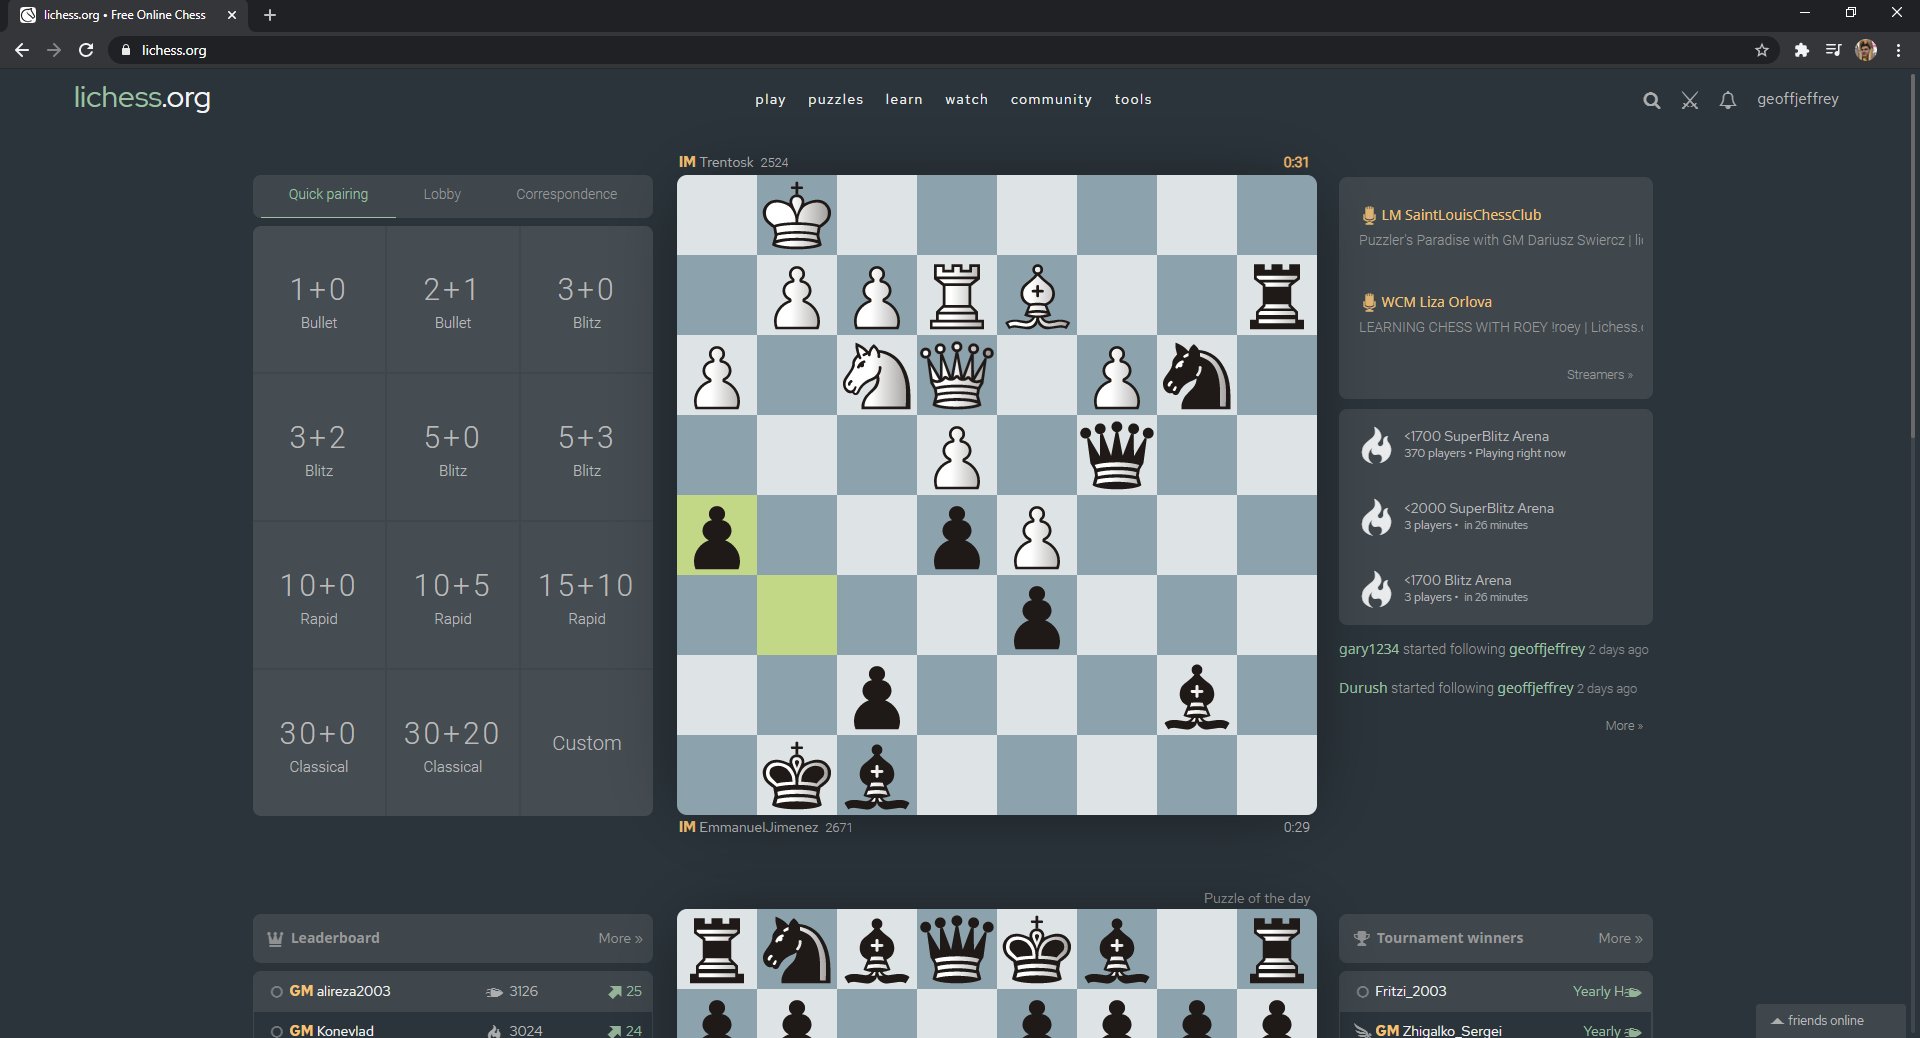 lichess.org on X: The open web means that we can redesign our